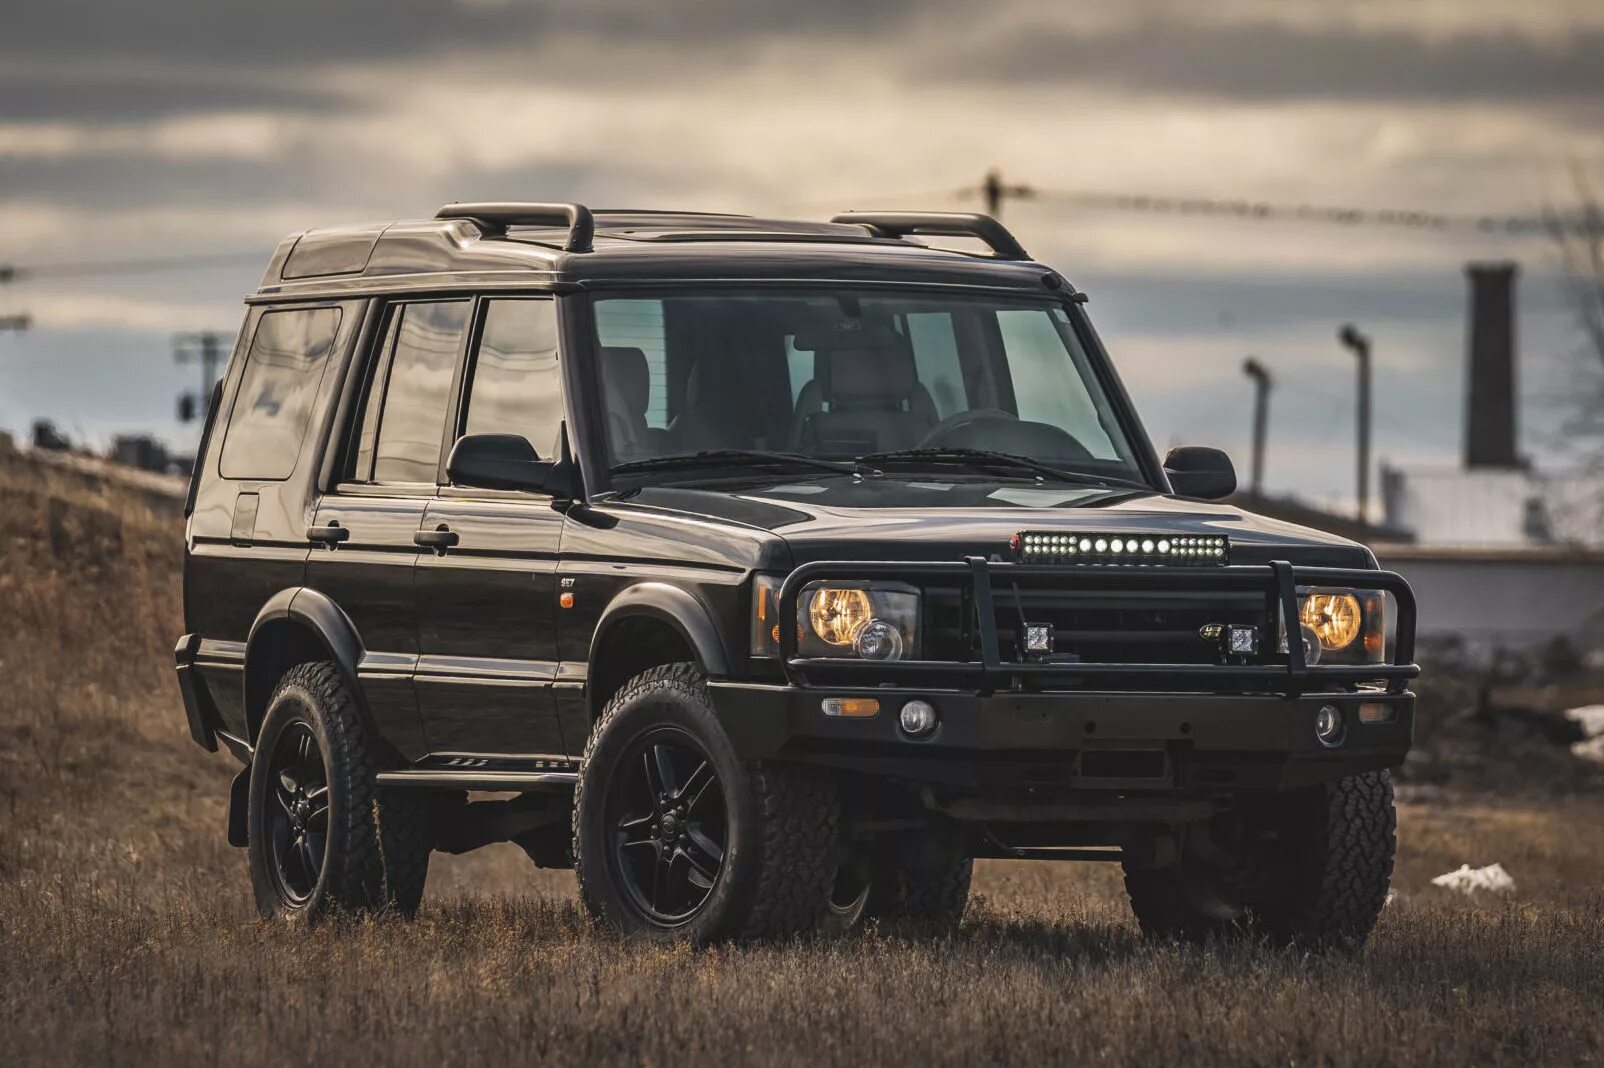 First discovery. Ленд Ровер Дискавери 1. Ленд Ровер Дискавери 2. 2004 Land Rover Discovery 1. Ландровер Дискавери 1992.